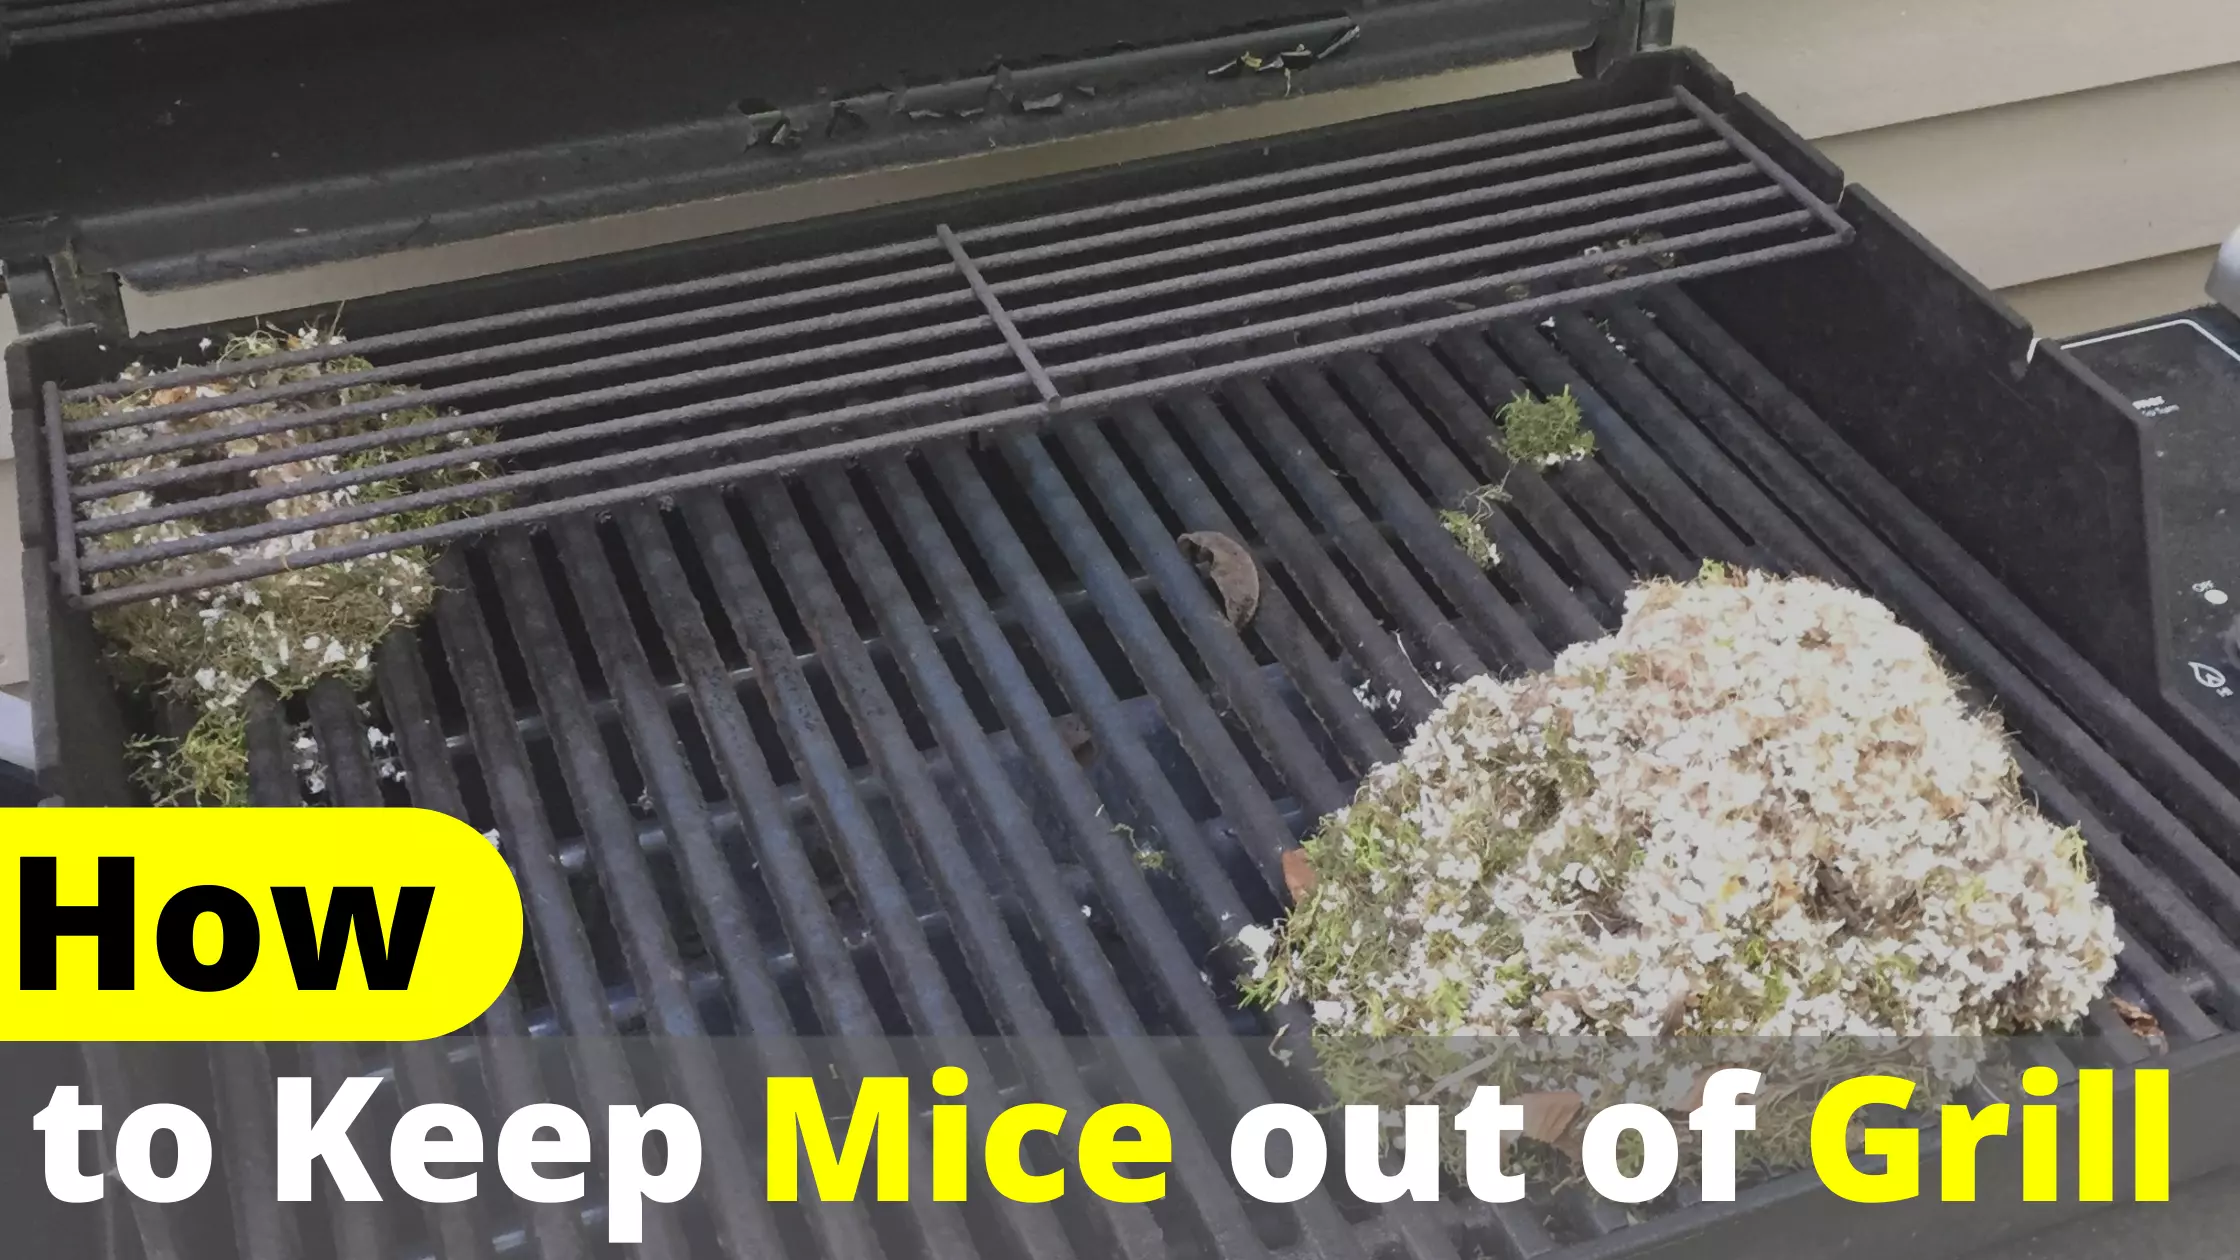 How to Keep Mice Out of Grill